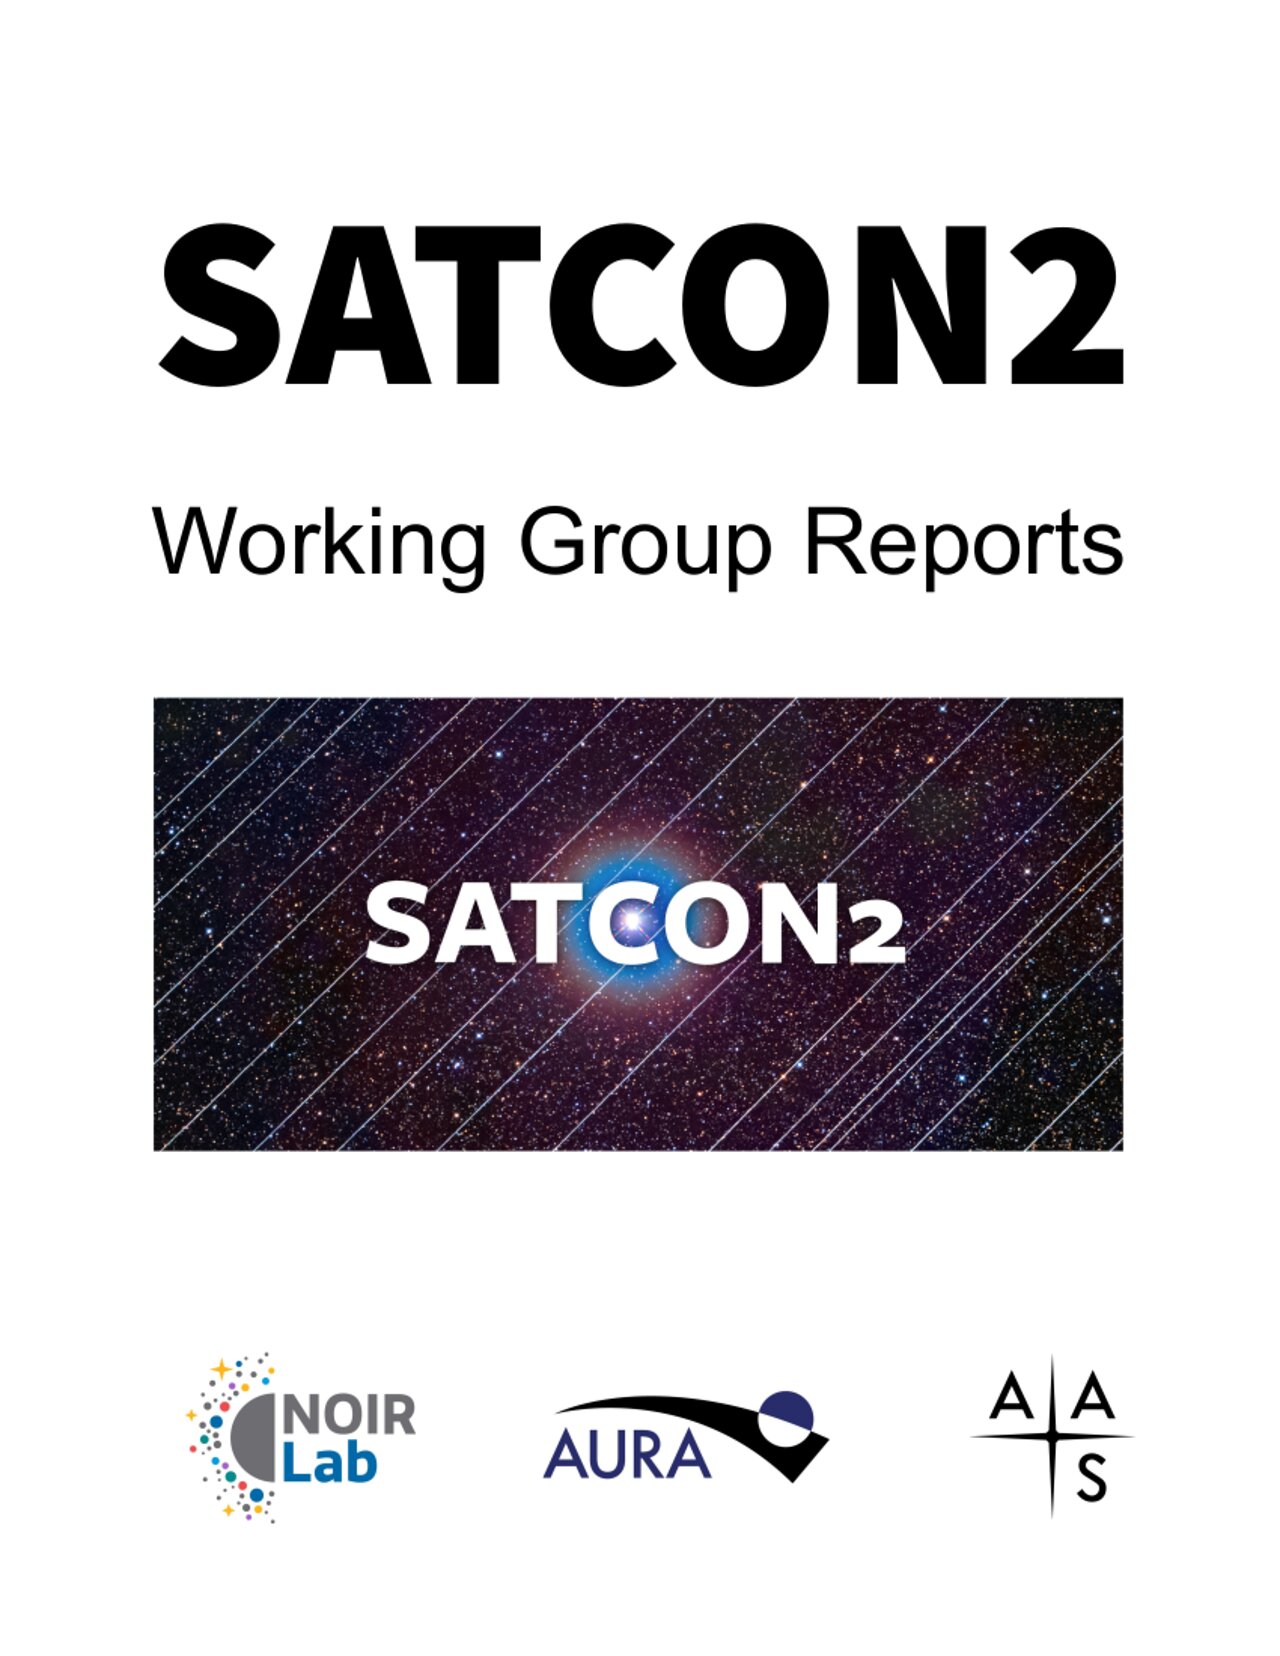 Cover of the SATCON2 Working Groups Report